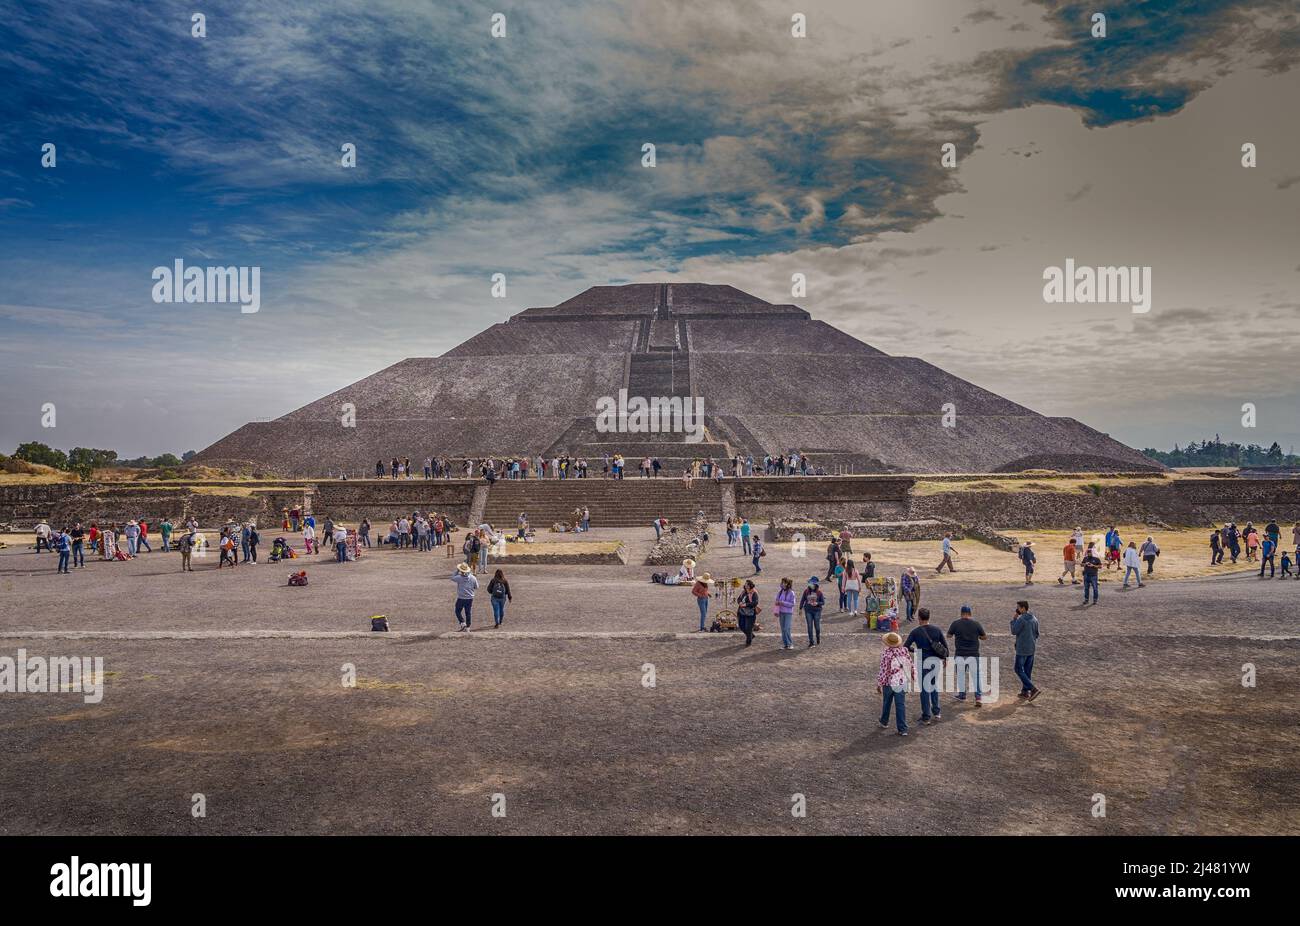 The Pyramids of the Sun and Moon and the Avenue of the dead flanked by temples and palaces in Teotihuacan, Mexico Stock Photo